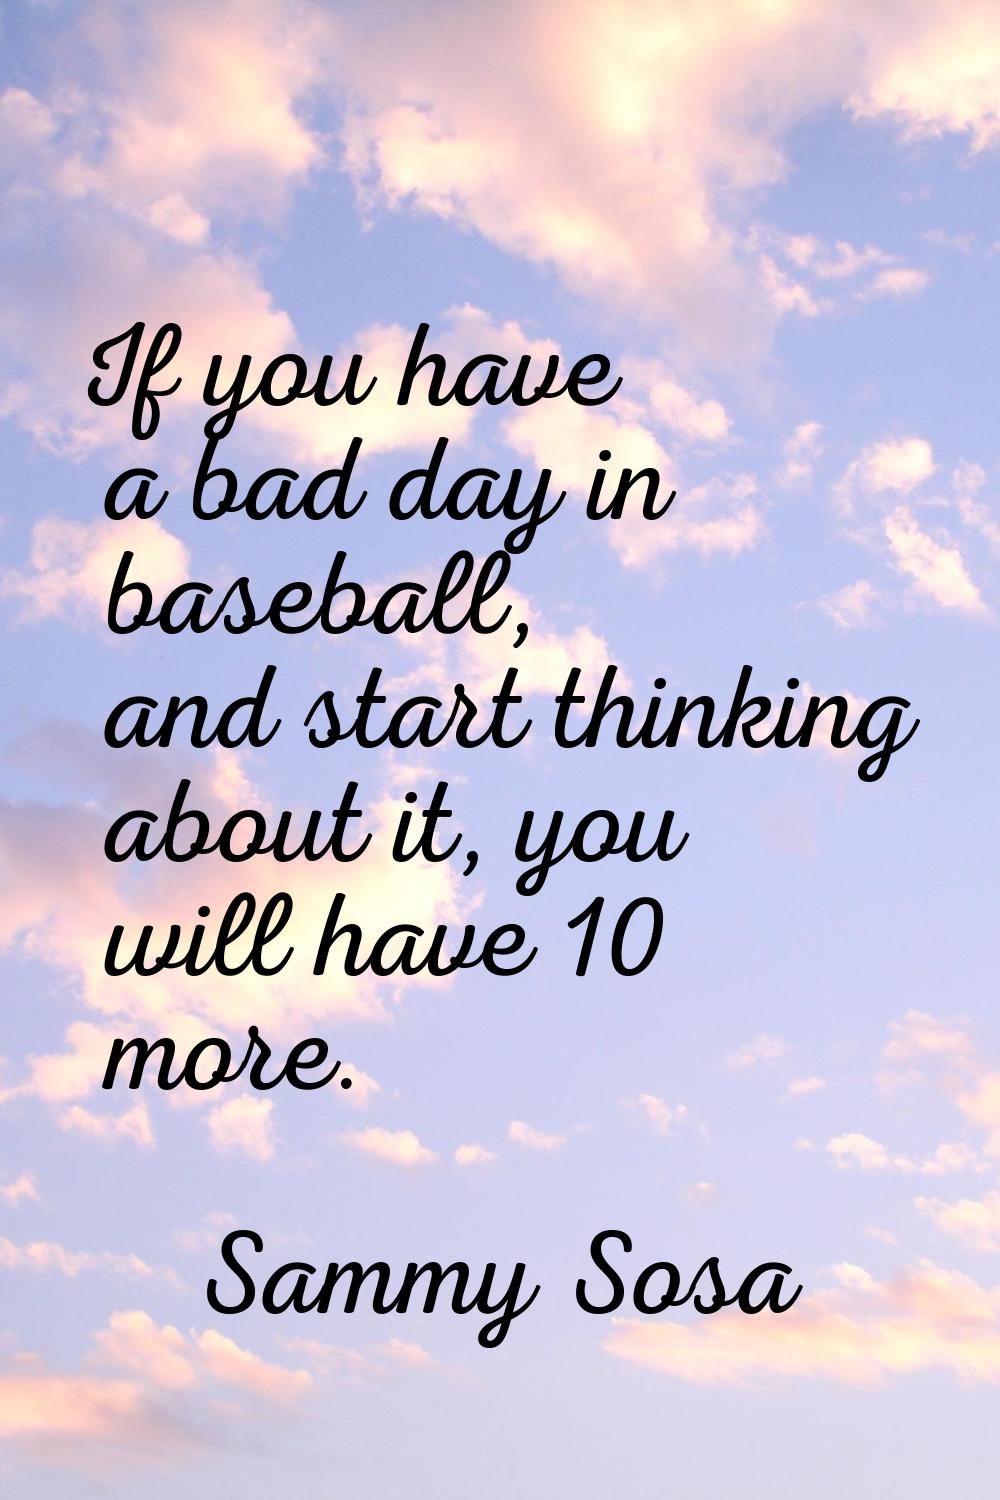 If you have a bad day in baseball, and start thinking about it, you will have 10 more.